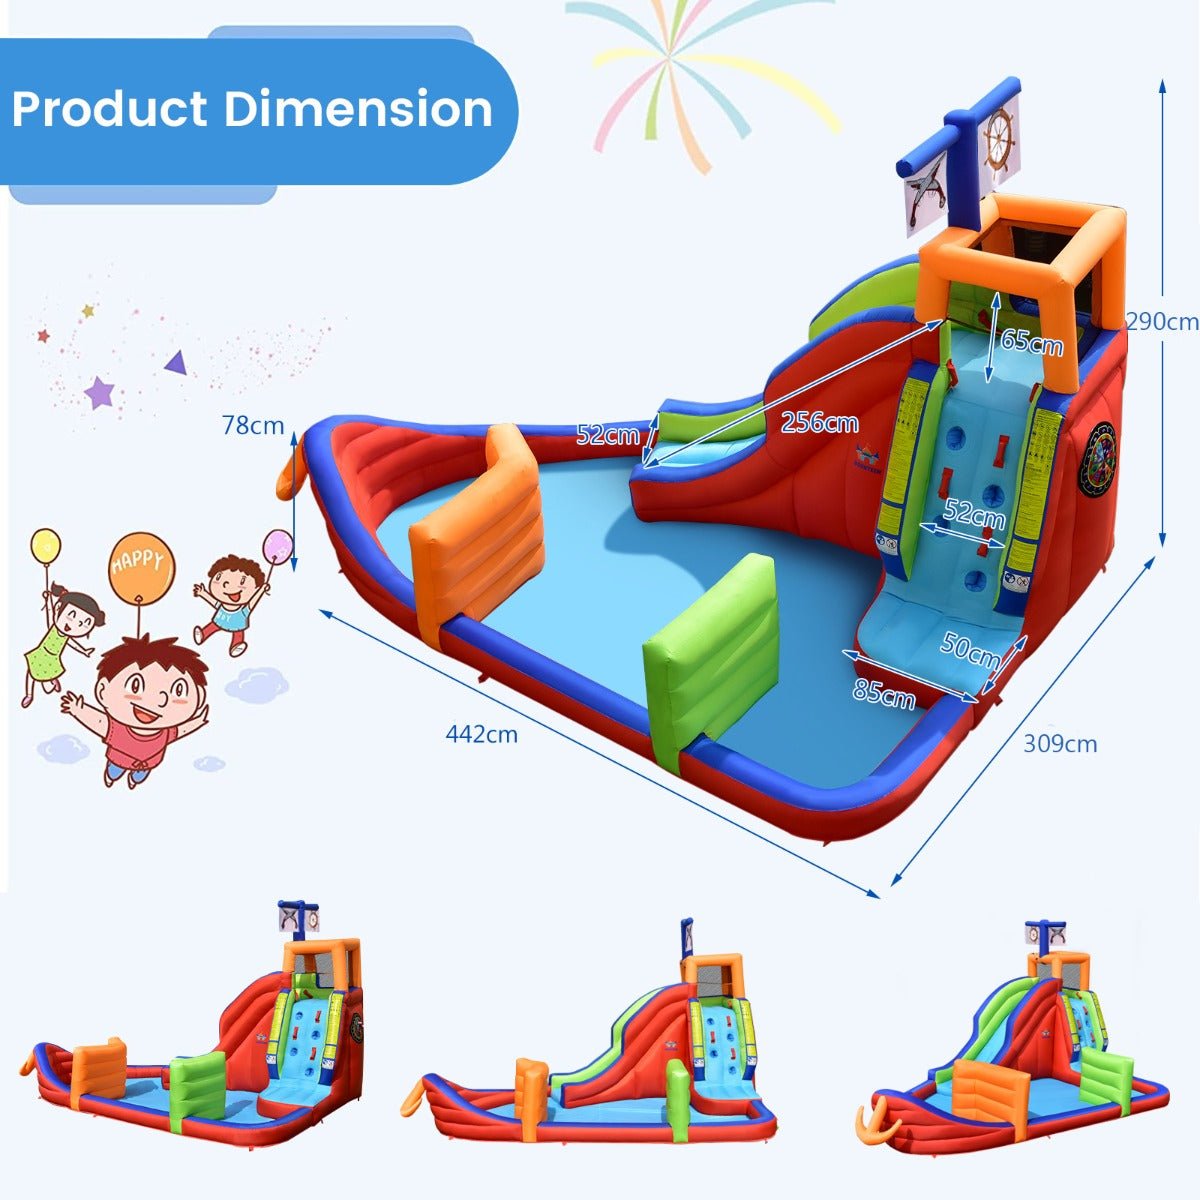 Exciting Water Play: 6-in-1 Inflatable Waterslide with Extended Slide